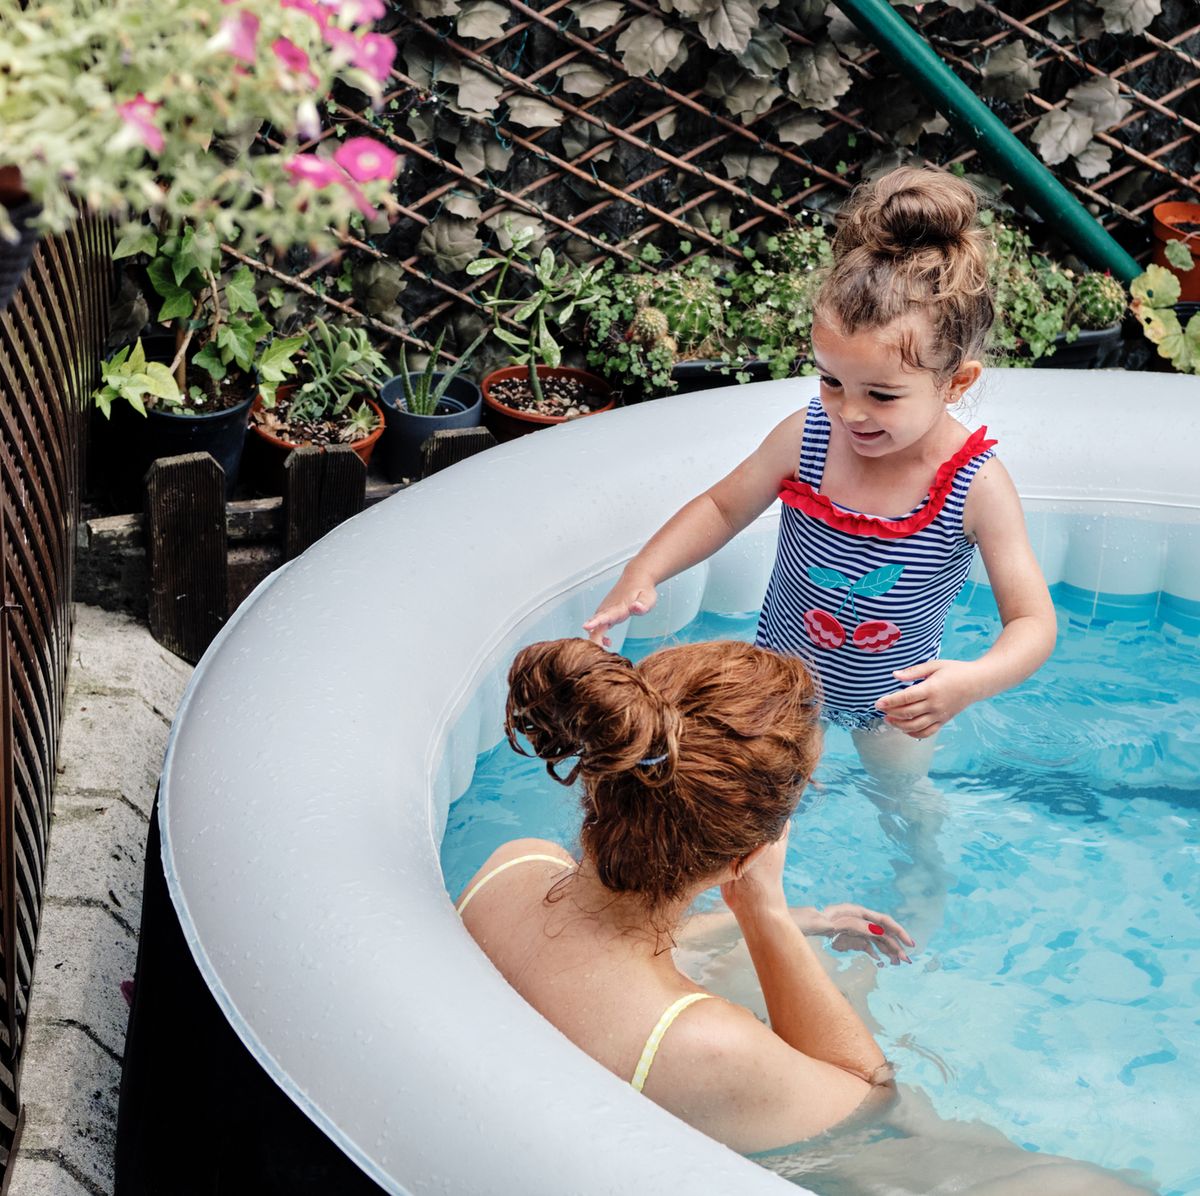 How to clean an inflatable hot tub or foldaway pool